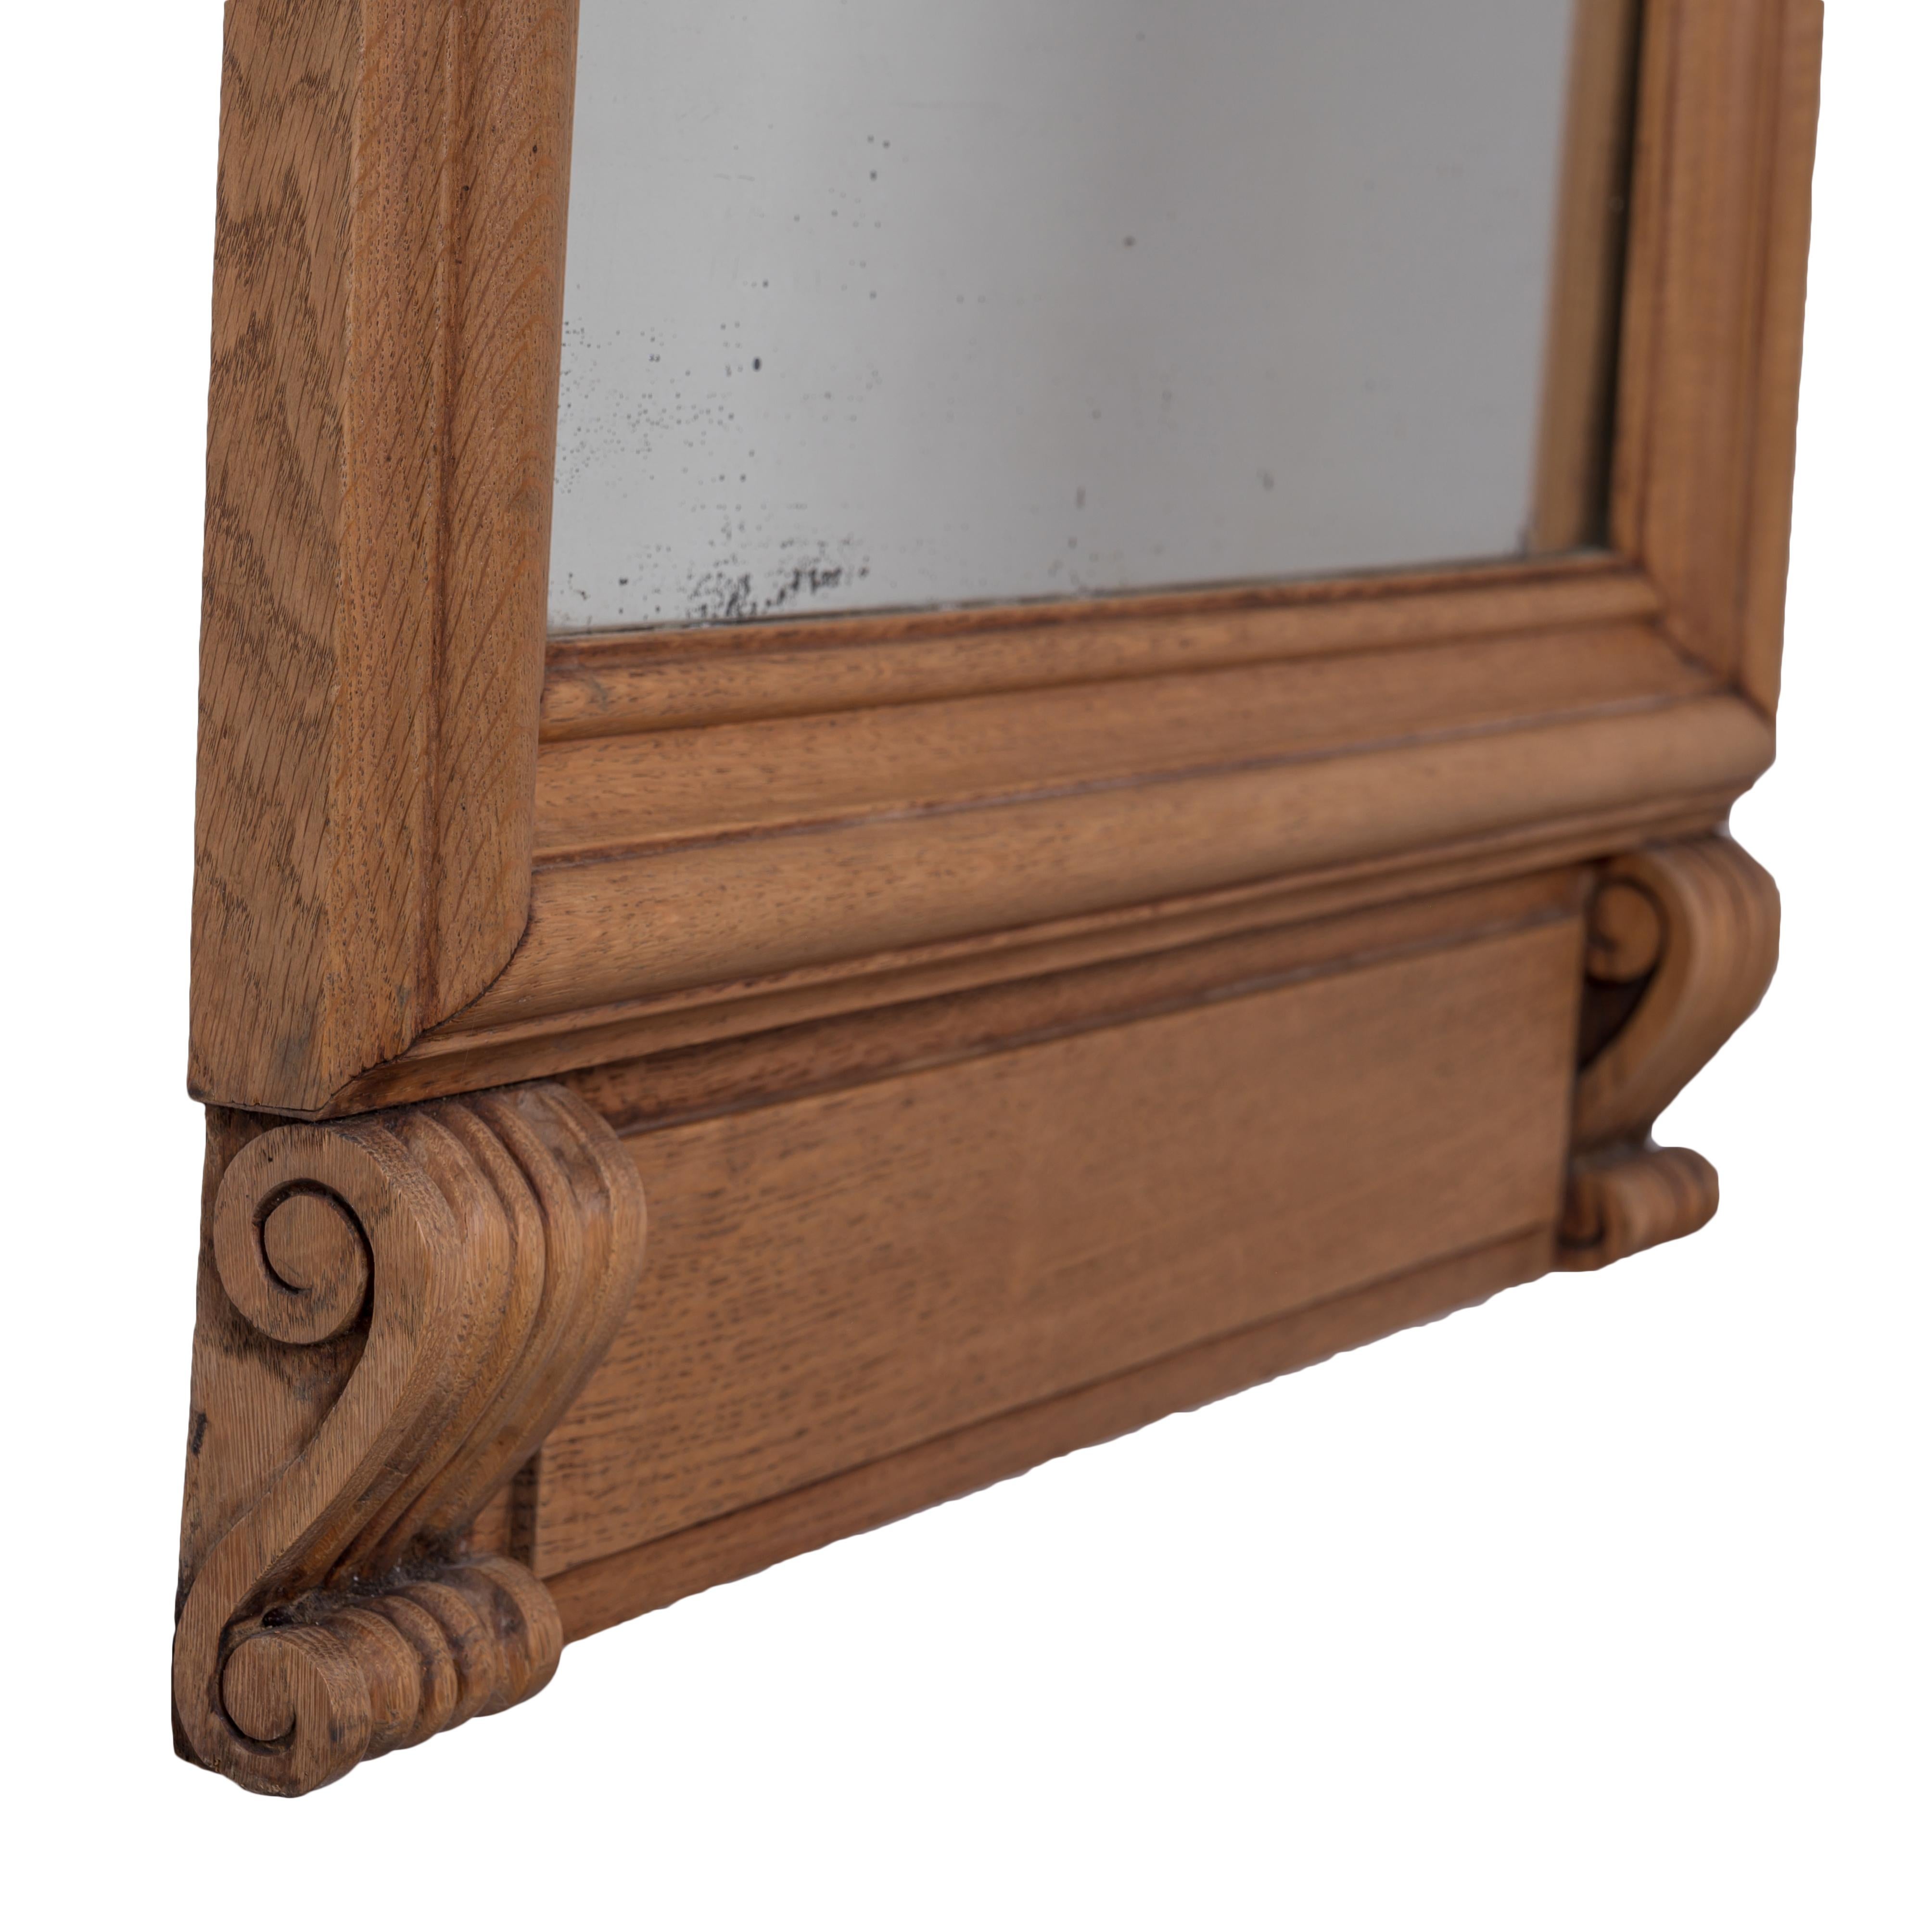 French Neoclassical Style Limed Oak Trumeau Mirrors, 19th Century - A Pair For Sale 4